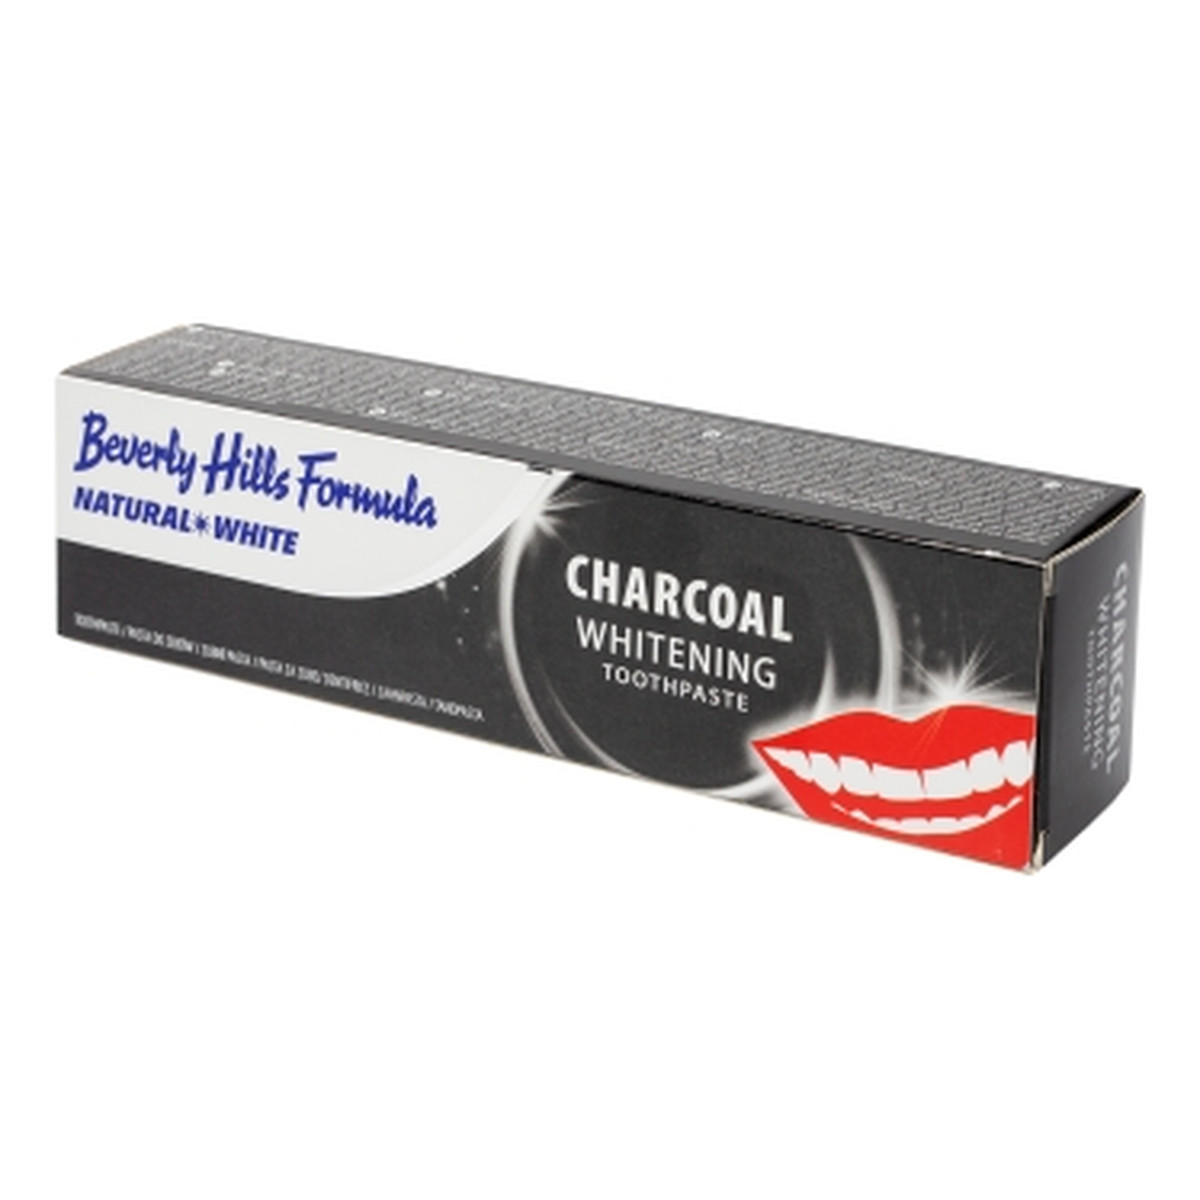 Beverly Hills PASTA DO ZEBOW NATURAL WHITE CHARCOAL WHITENING 100ml